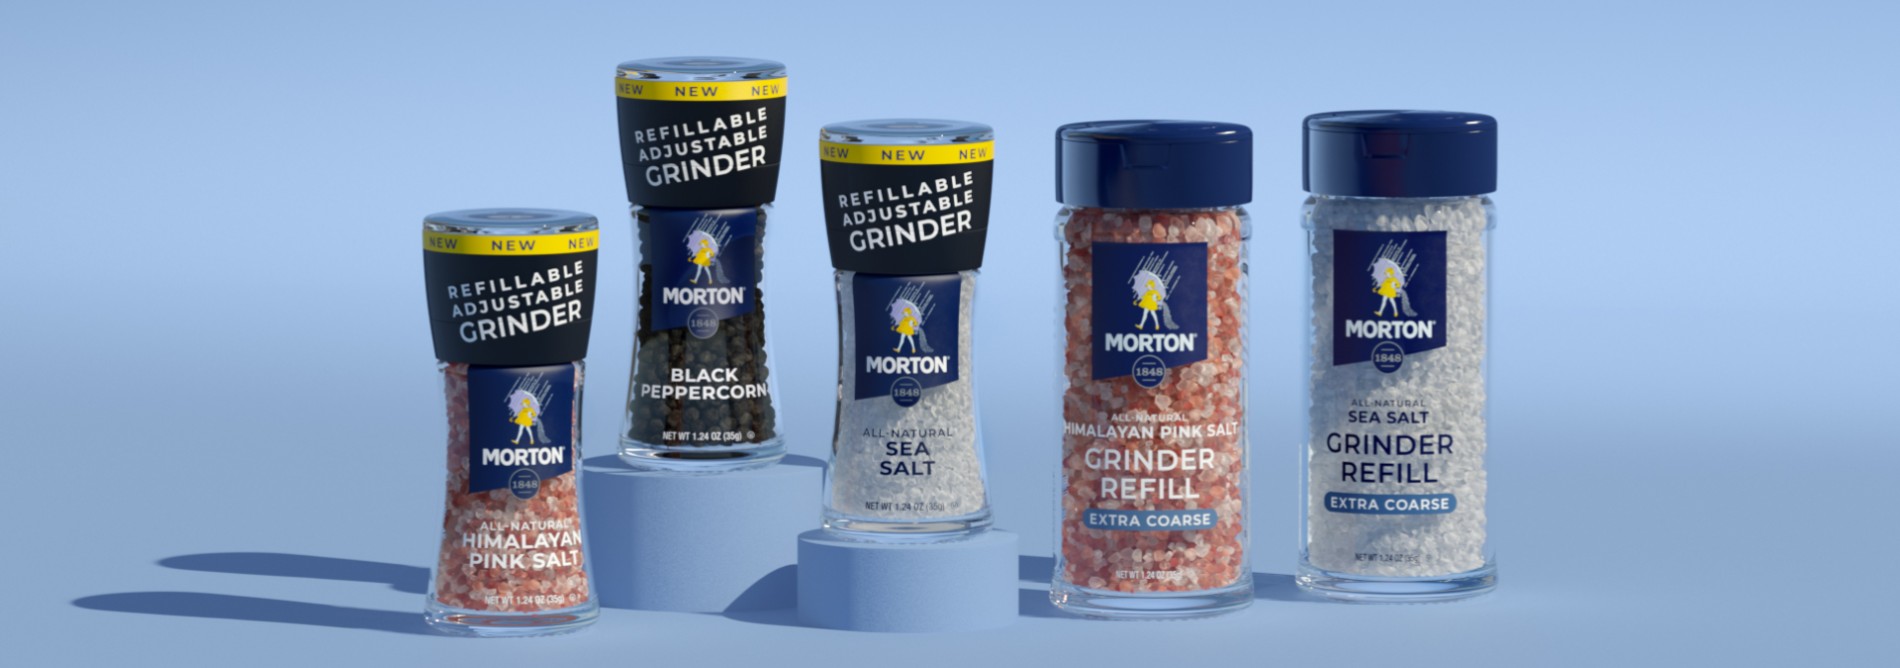 Newly redesigned refillable grinder trio is available in three key products: All-Natural Sea Salt, All-Natural Himalayan Pink Salt, and Black Peppercorn.